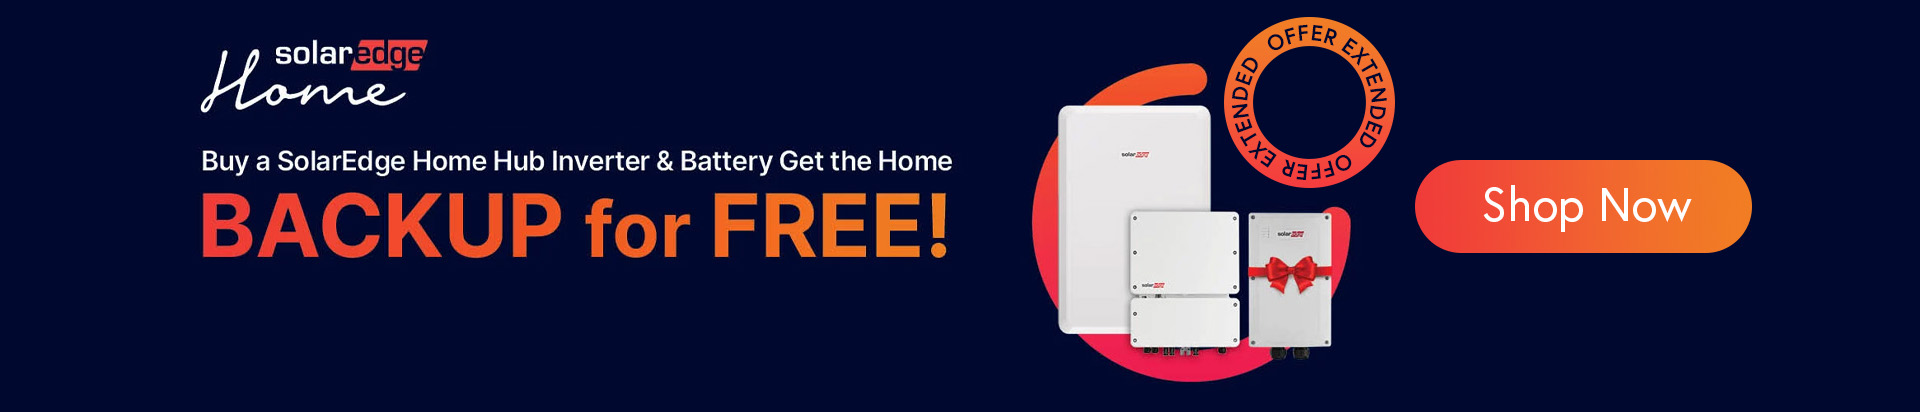 Get a free SolarEdge Home Backup Interface